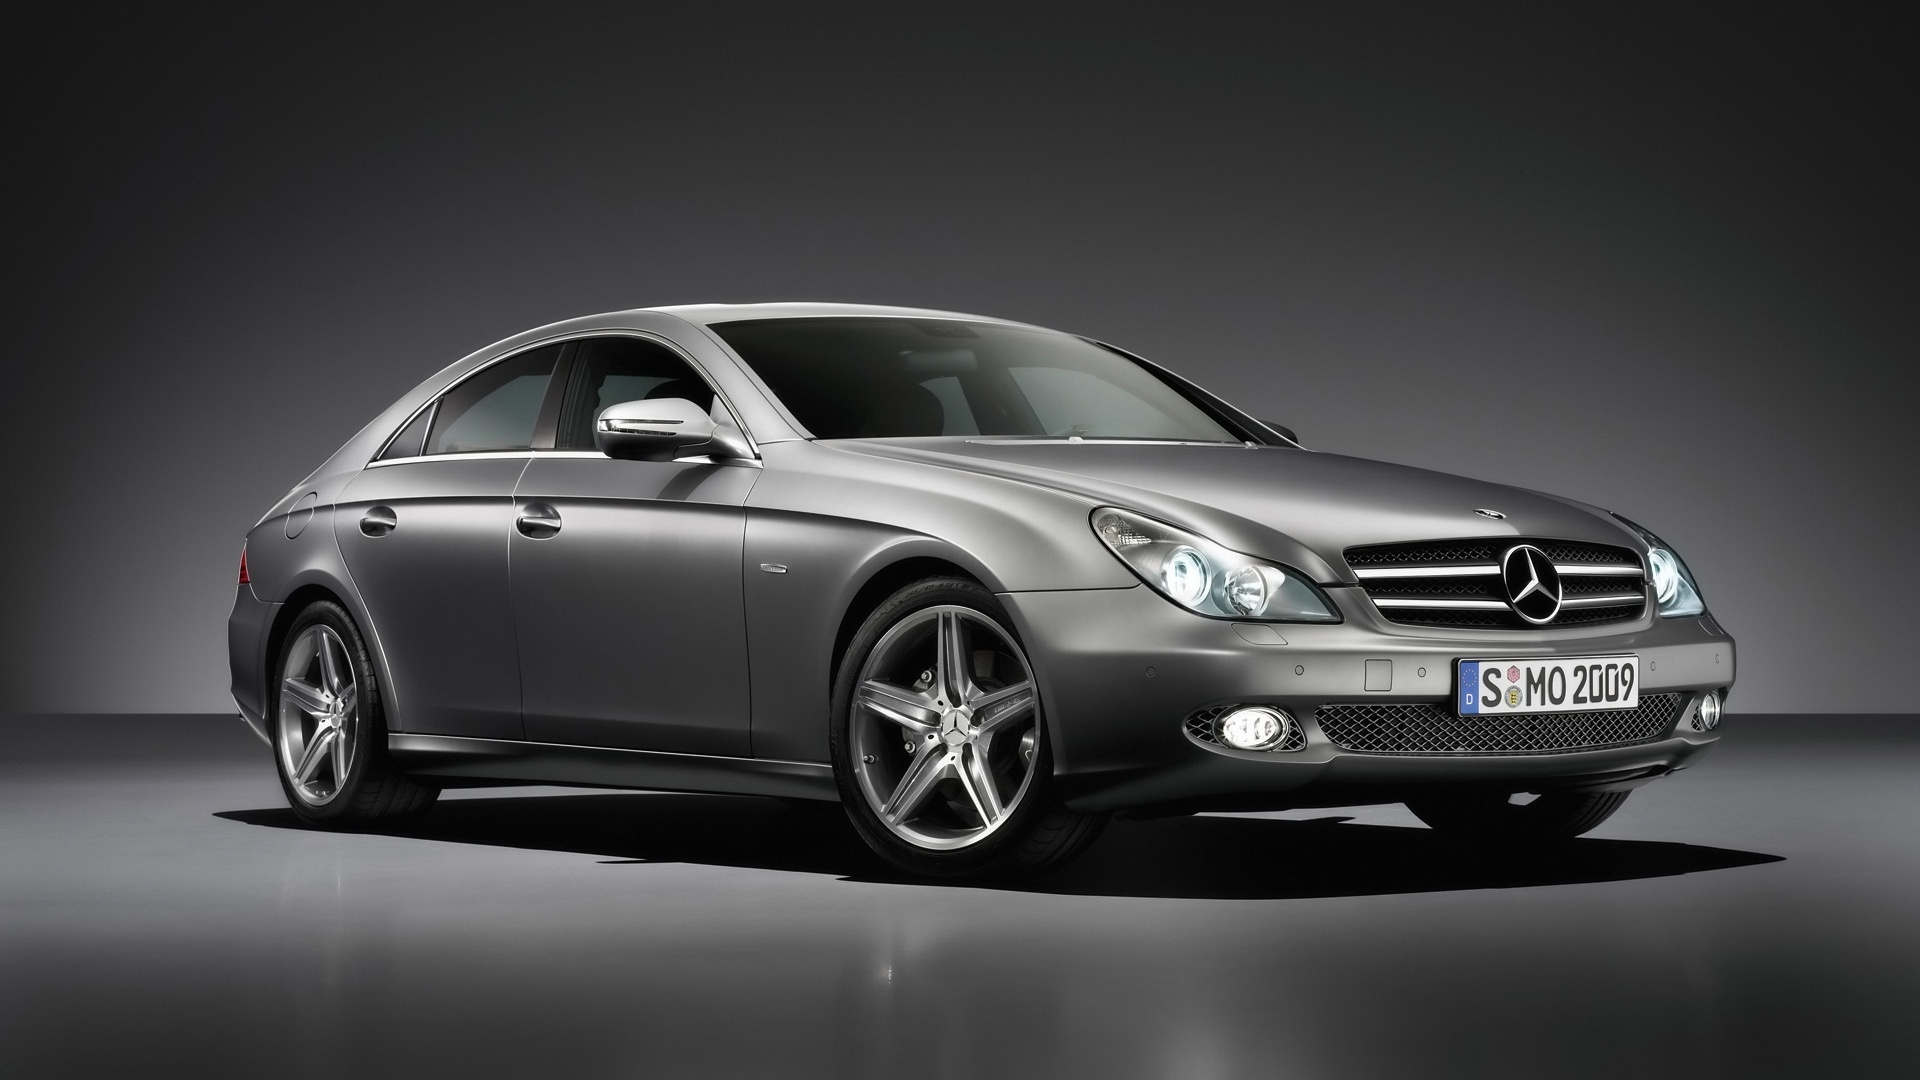 Mercedes Benz CLS 2009 for 1920 x 1080 HDTV 1080p resolution